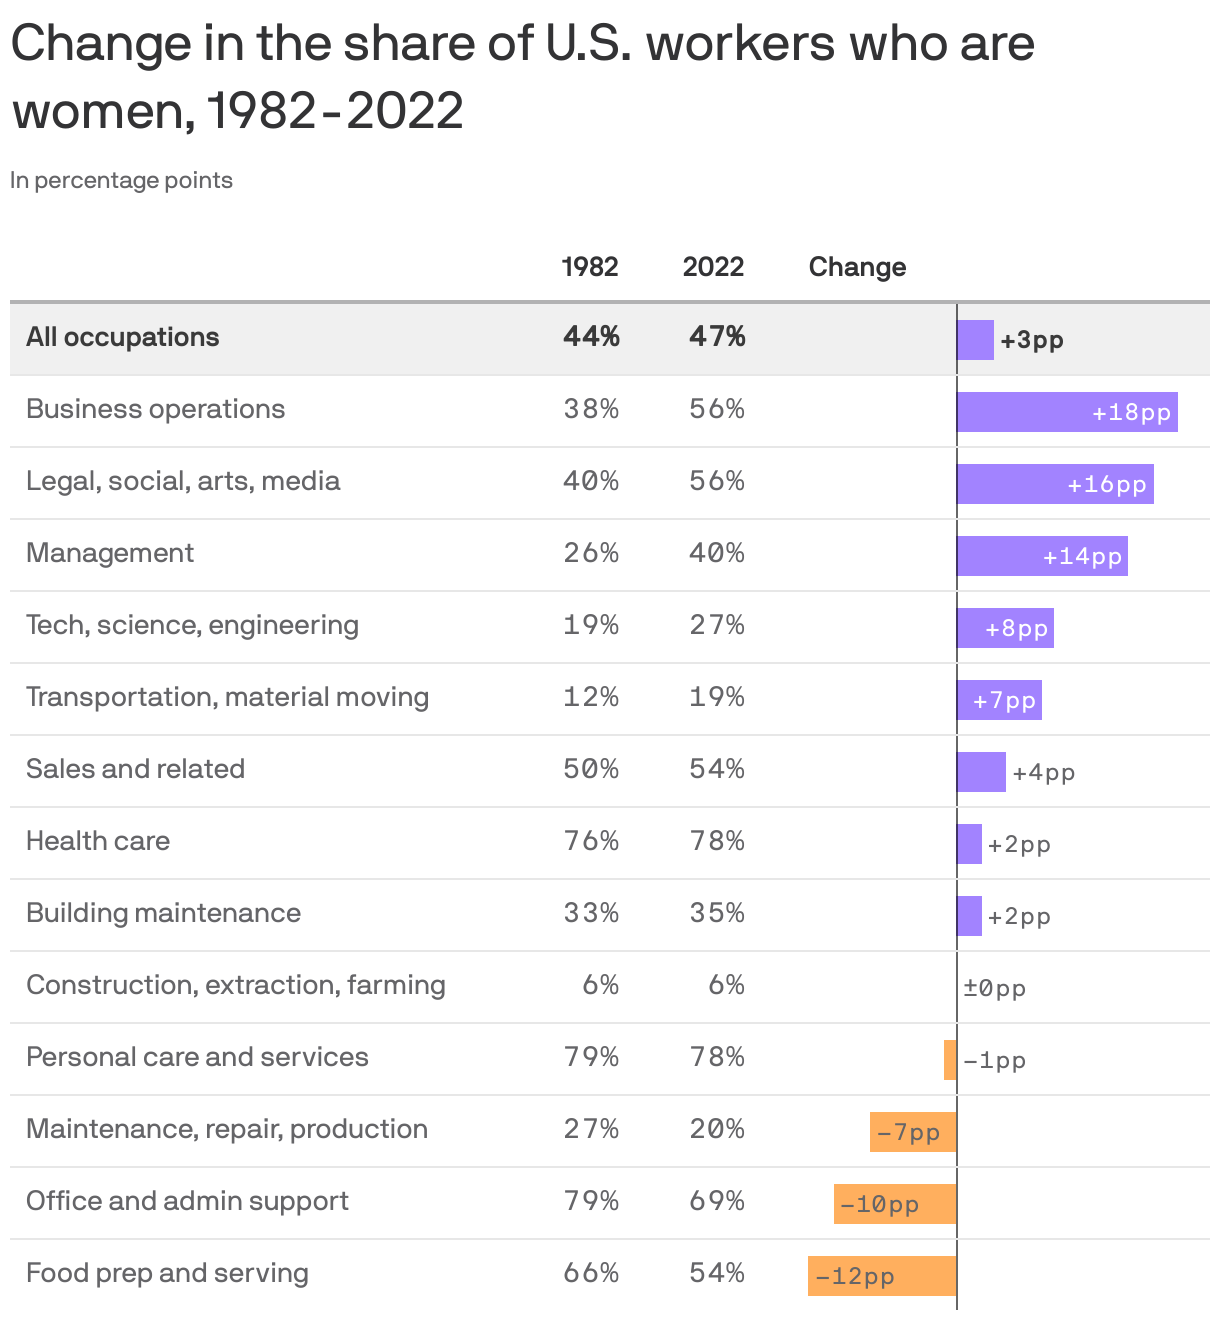 Change in the share of U.S. workers who are women, 1982-2022